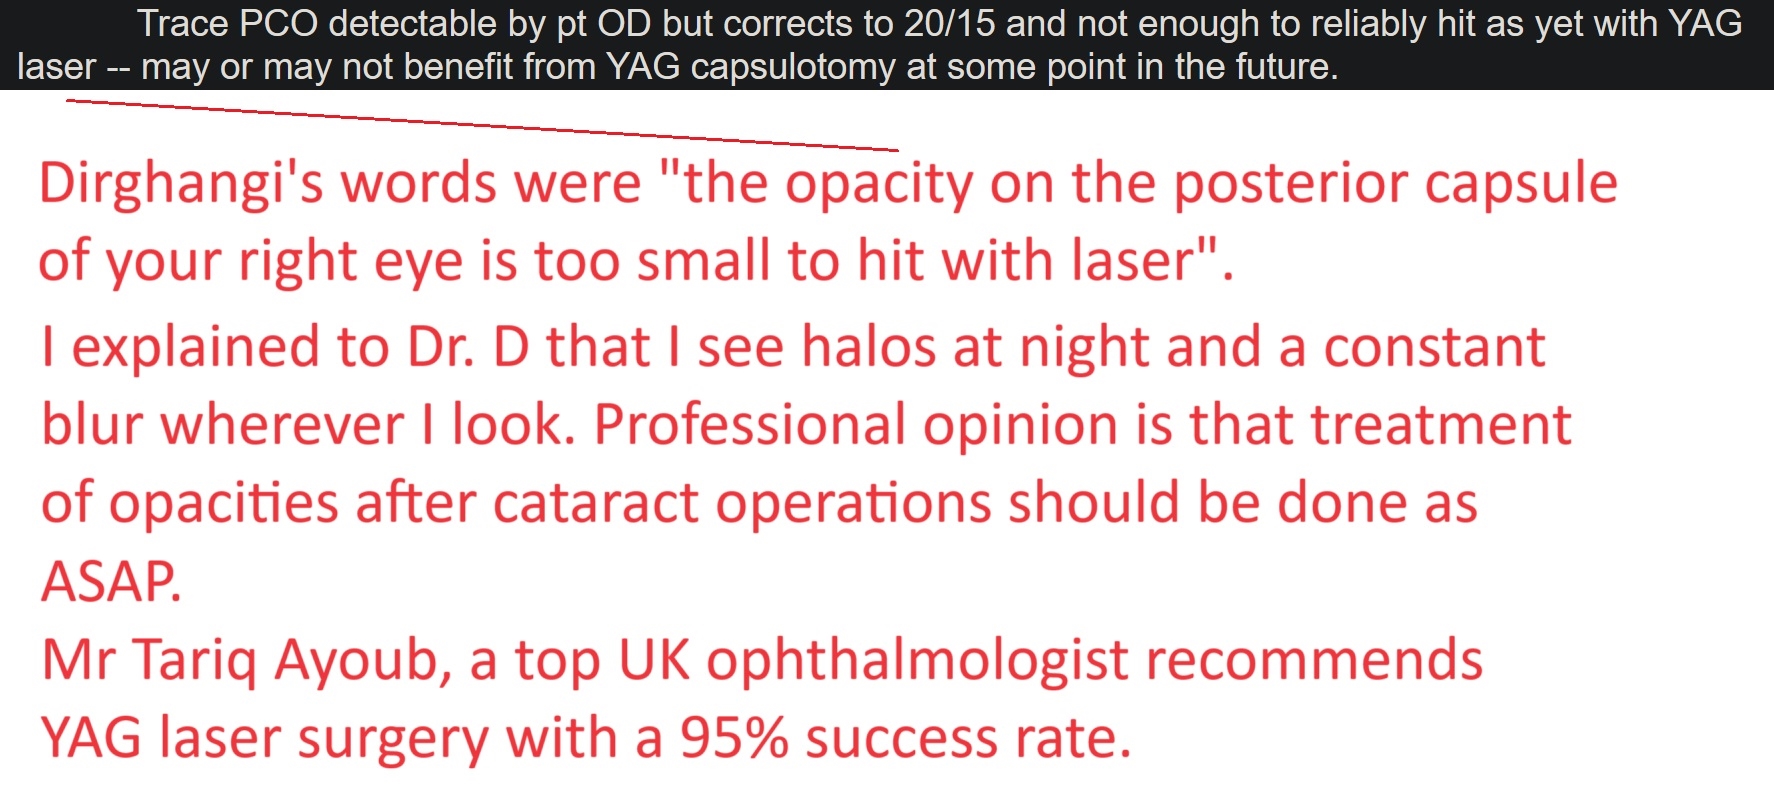 UVA Doctor claim that opacity too small hit laser.